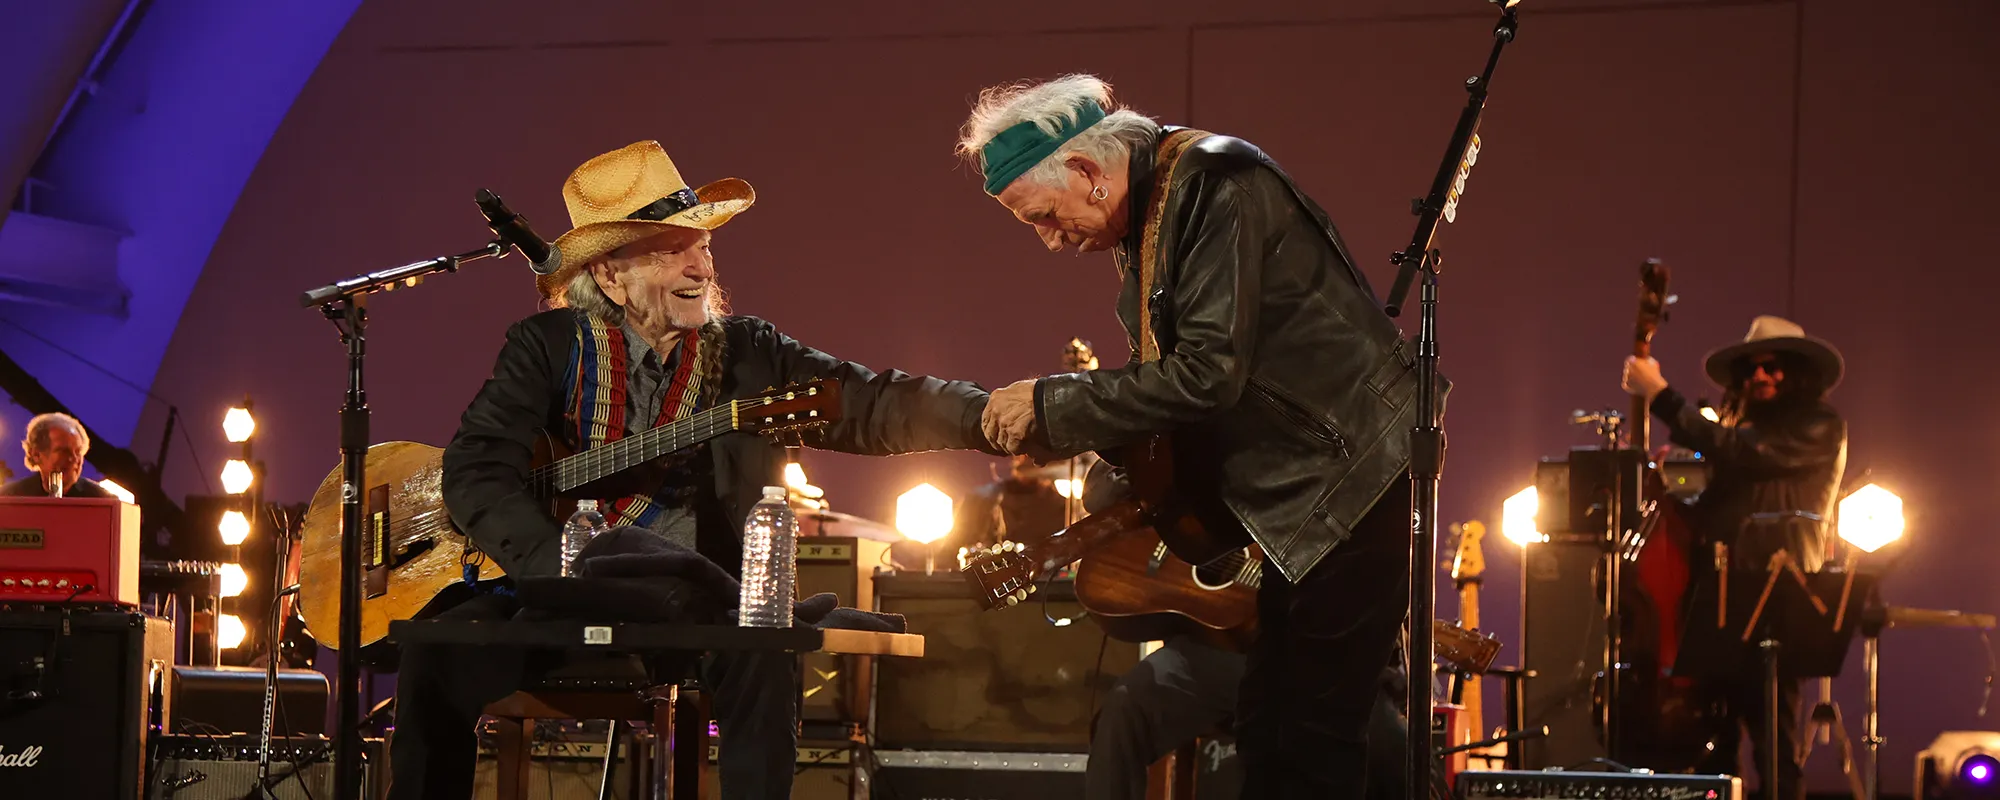 Keith Richards, Kris Kristofferson, Sheryl Crow & More Highlights From Night 2 of Willie Nelson’s 90th Birthday Tribute